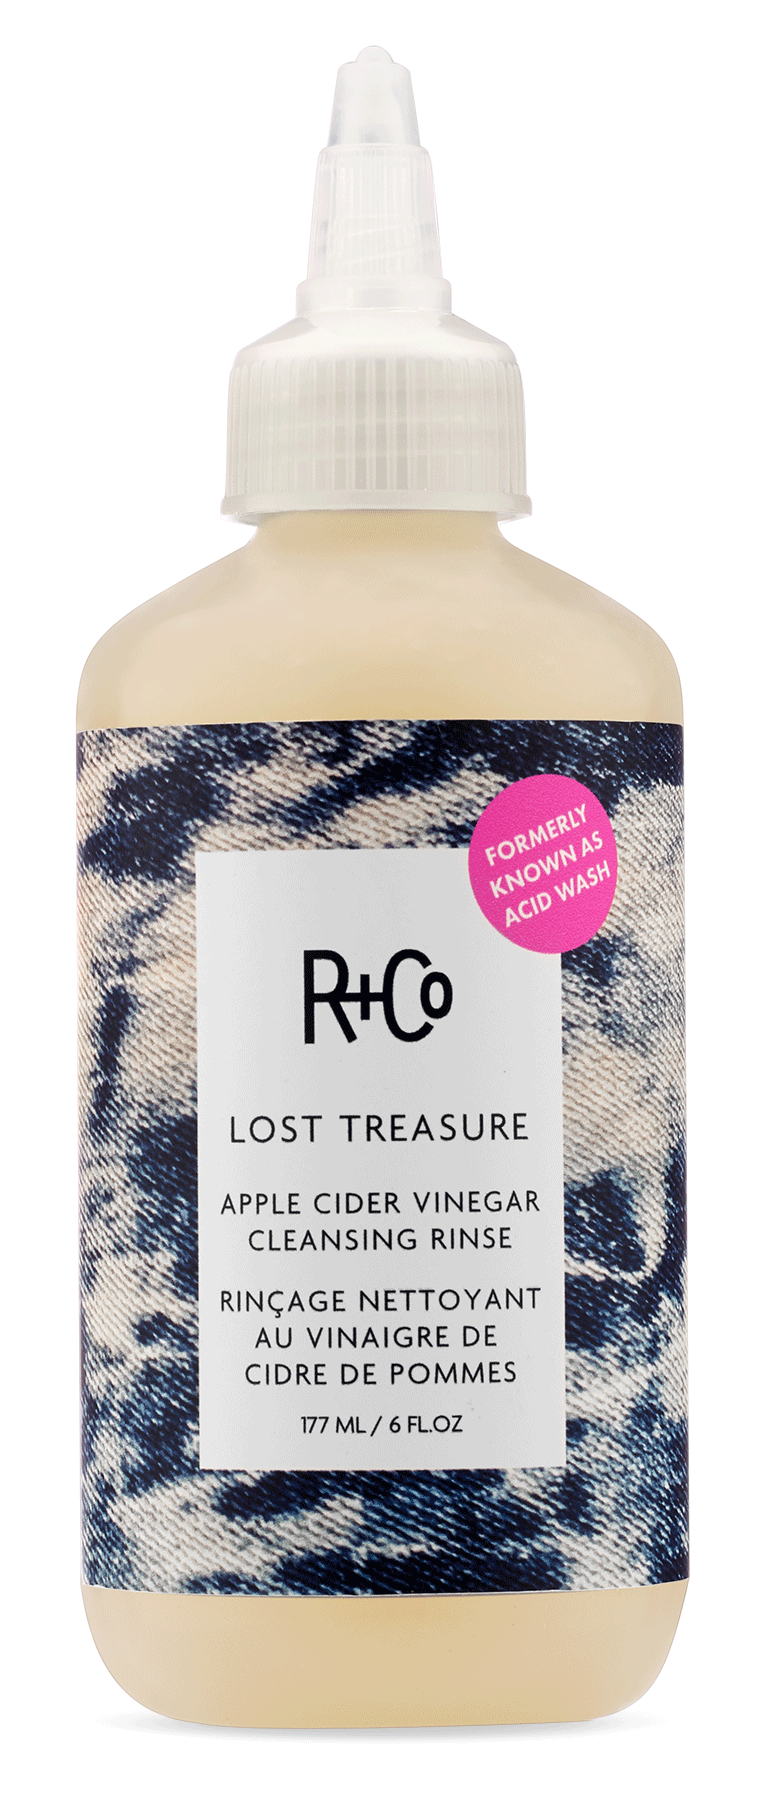 R+Co Acid Wash Apple Cider Vinegar Cleansing Rinse, Scalp Calming Hair Cleanser for Soft and Shiny Hair, 6 Fl Oz